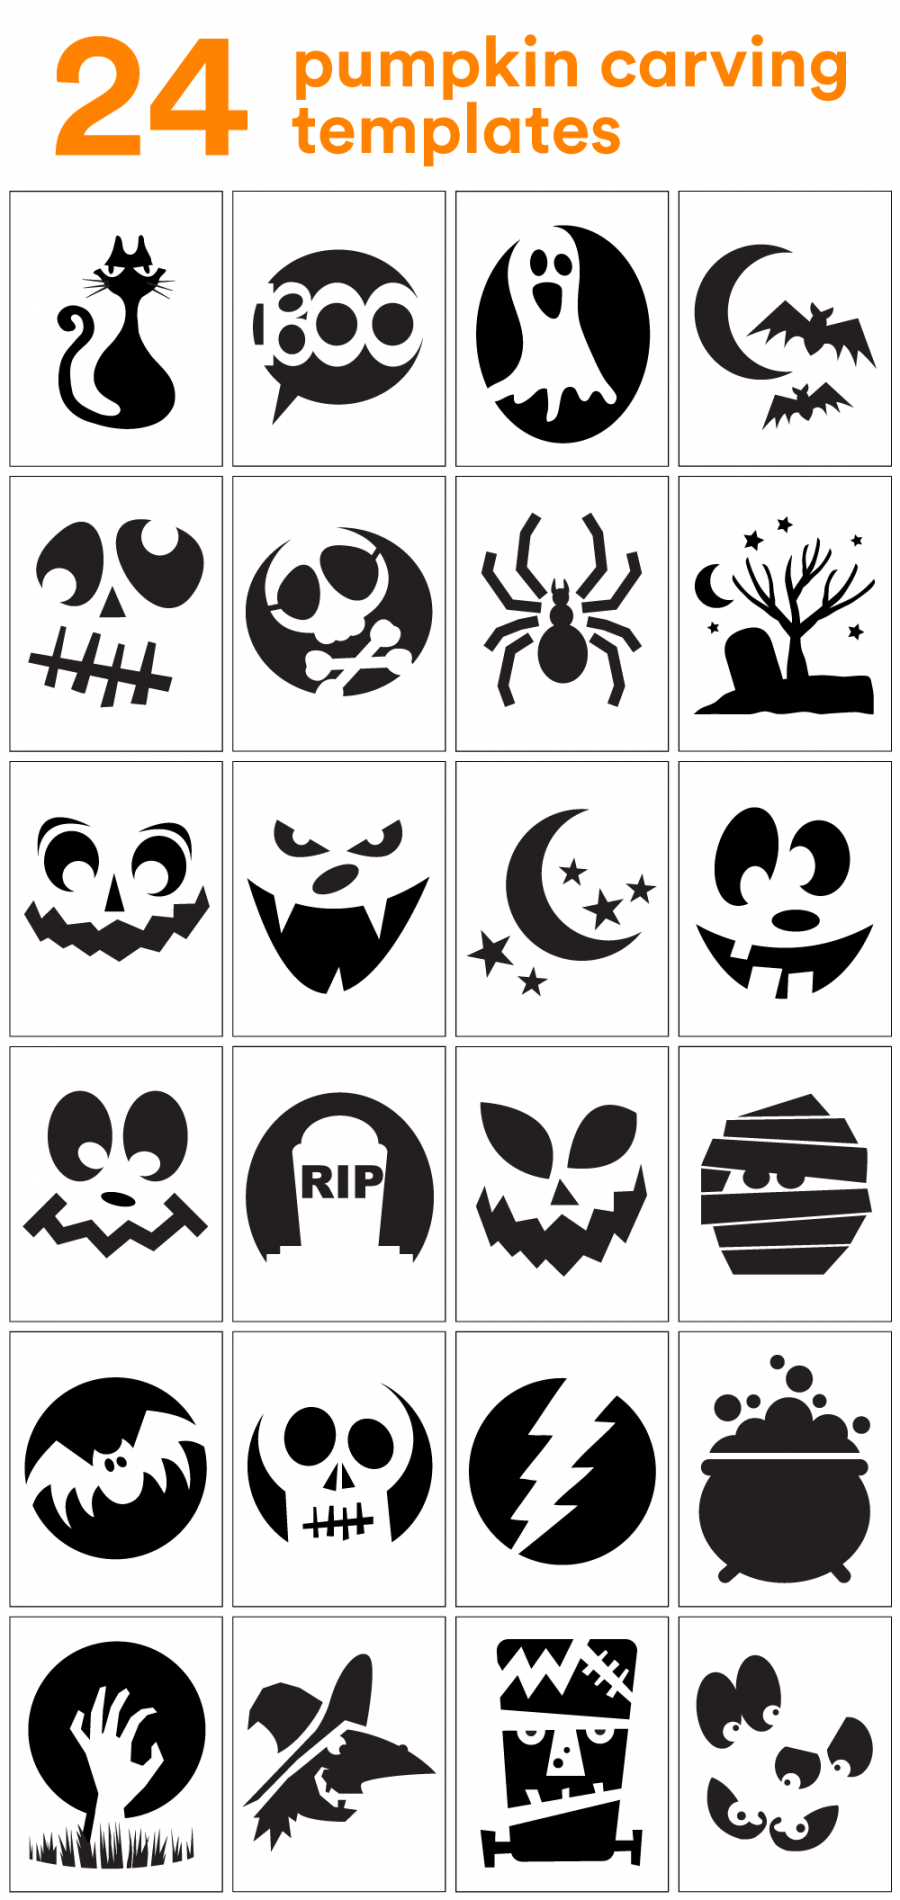 Free Pumpkin Stencil Printable - Printable - How to Carve the Coolest Pumpkin on the Block (Carving Stencils